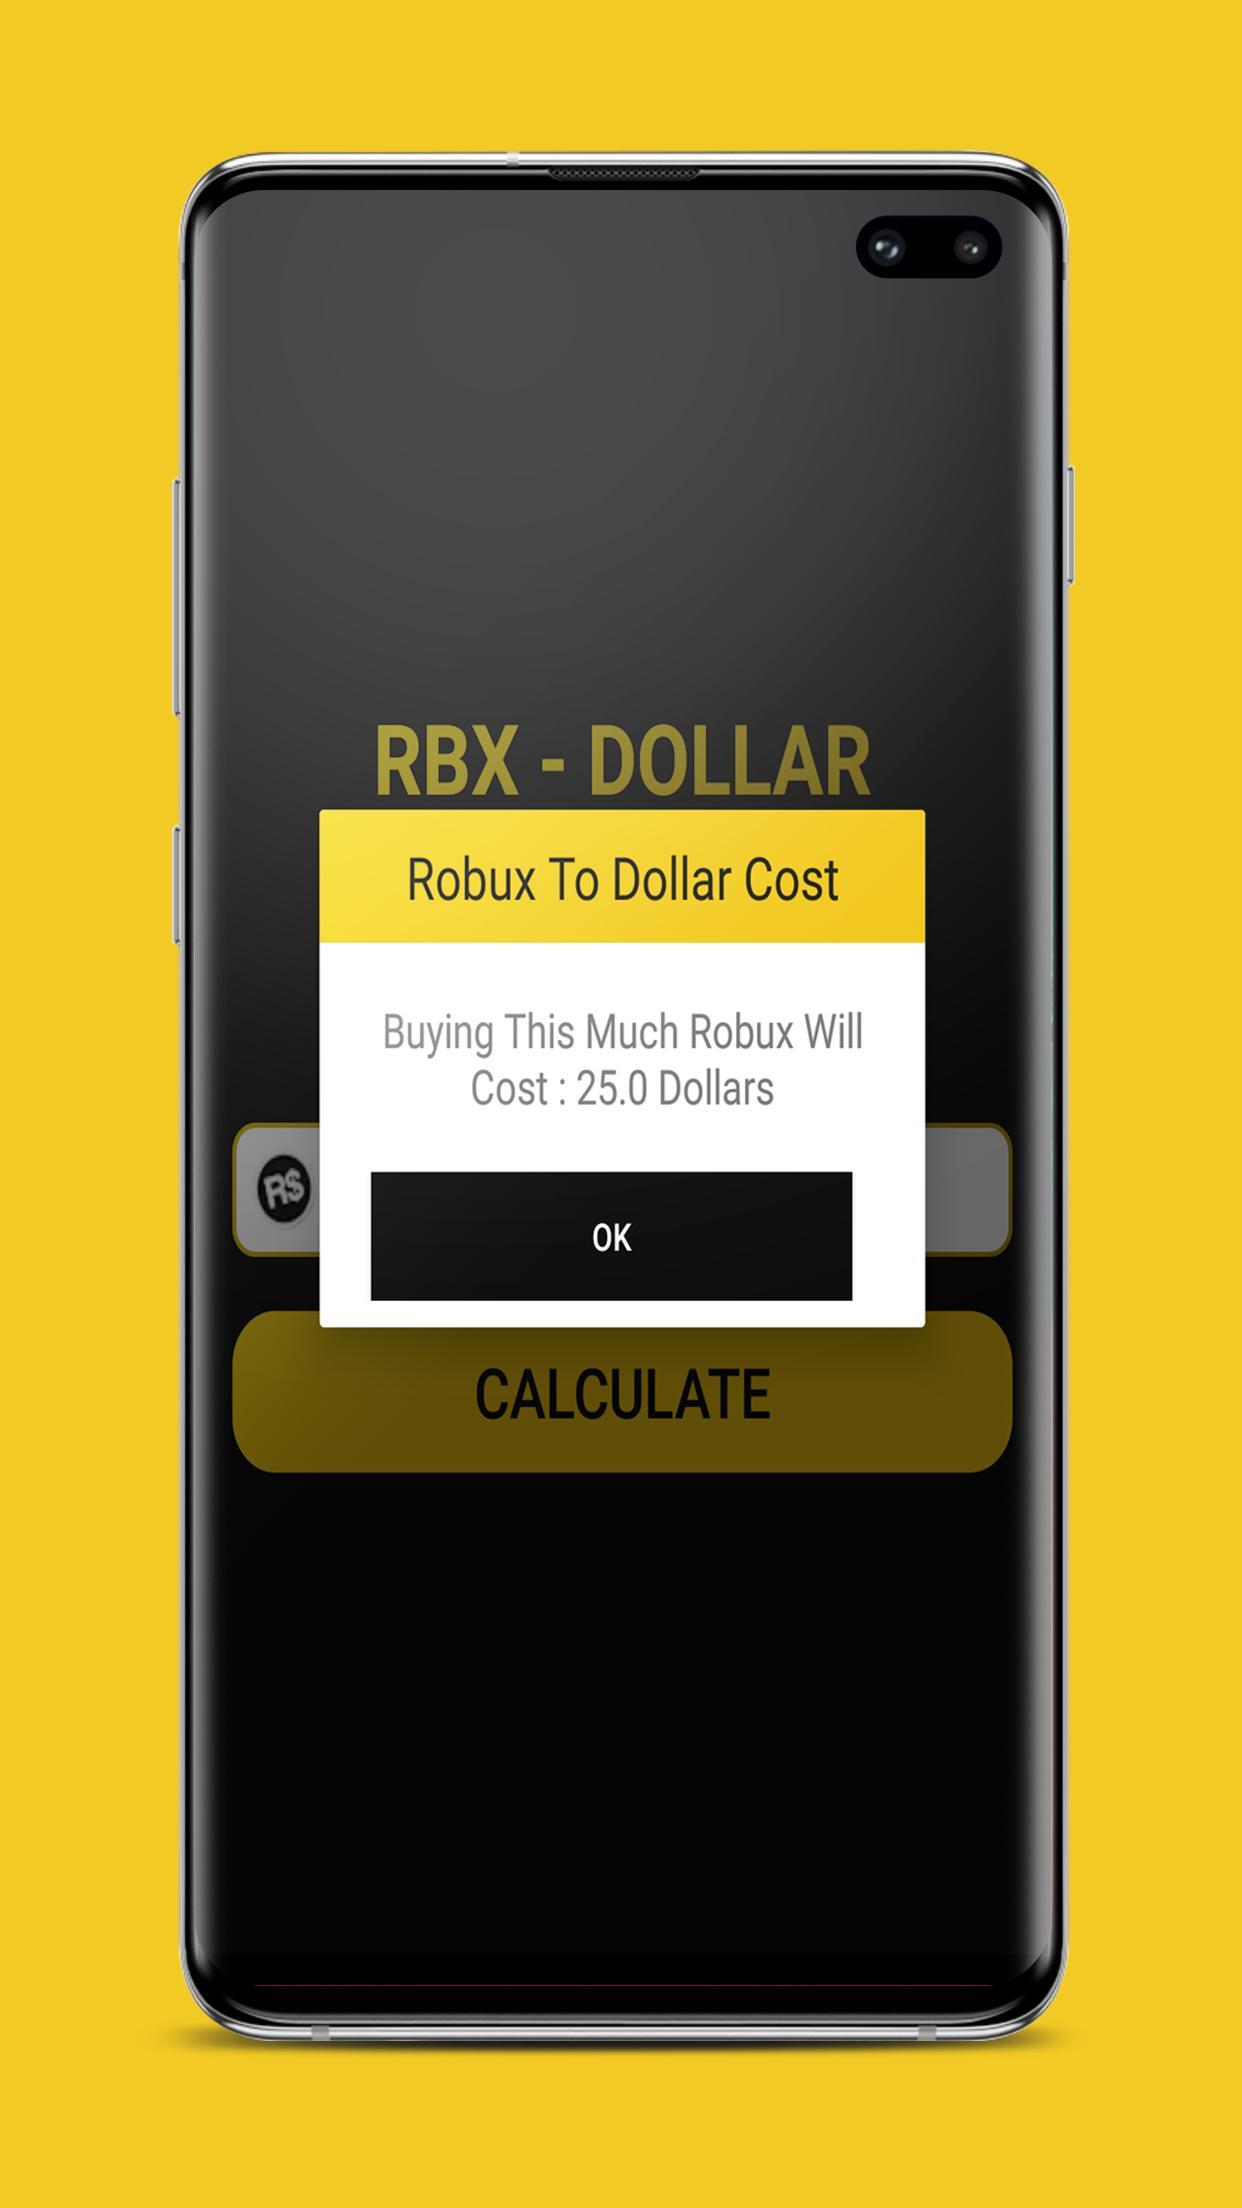 Free Robux Counter Rbx Calculator Conversion For Android Apk Download - get free robux counter rbx calculator conversion for android